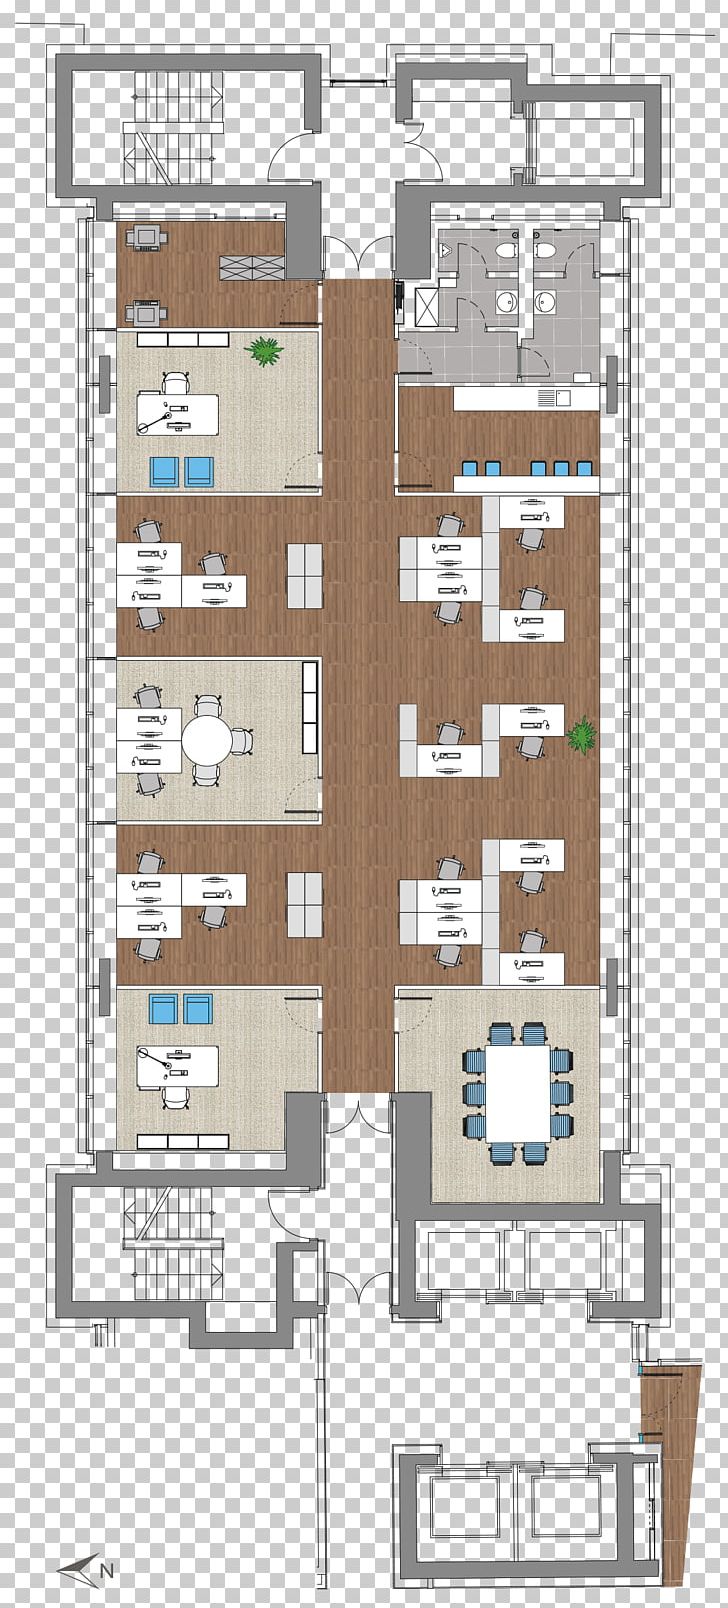 Ring Karree Architecture Building Facade Floor Plan PNG, Clipart, Angle, Architectural Plan, Architecture, Architecture Building, Area Free PNG Download